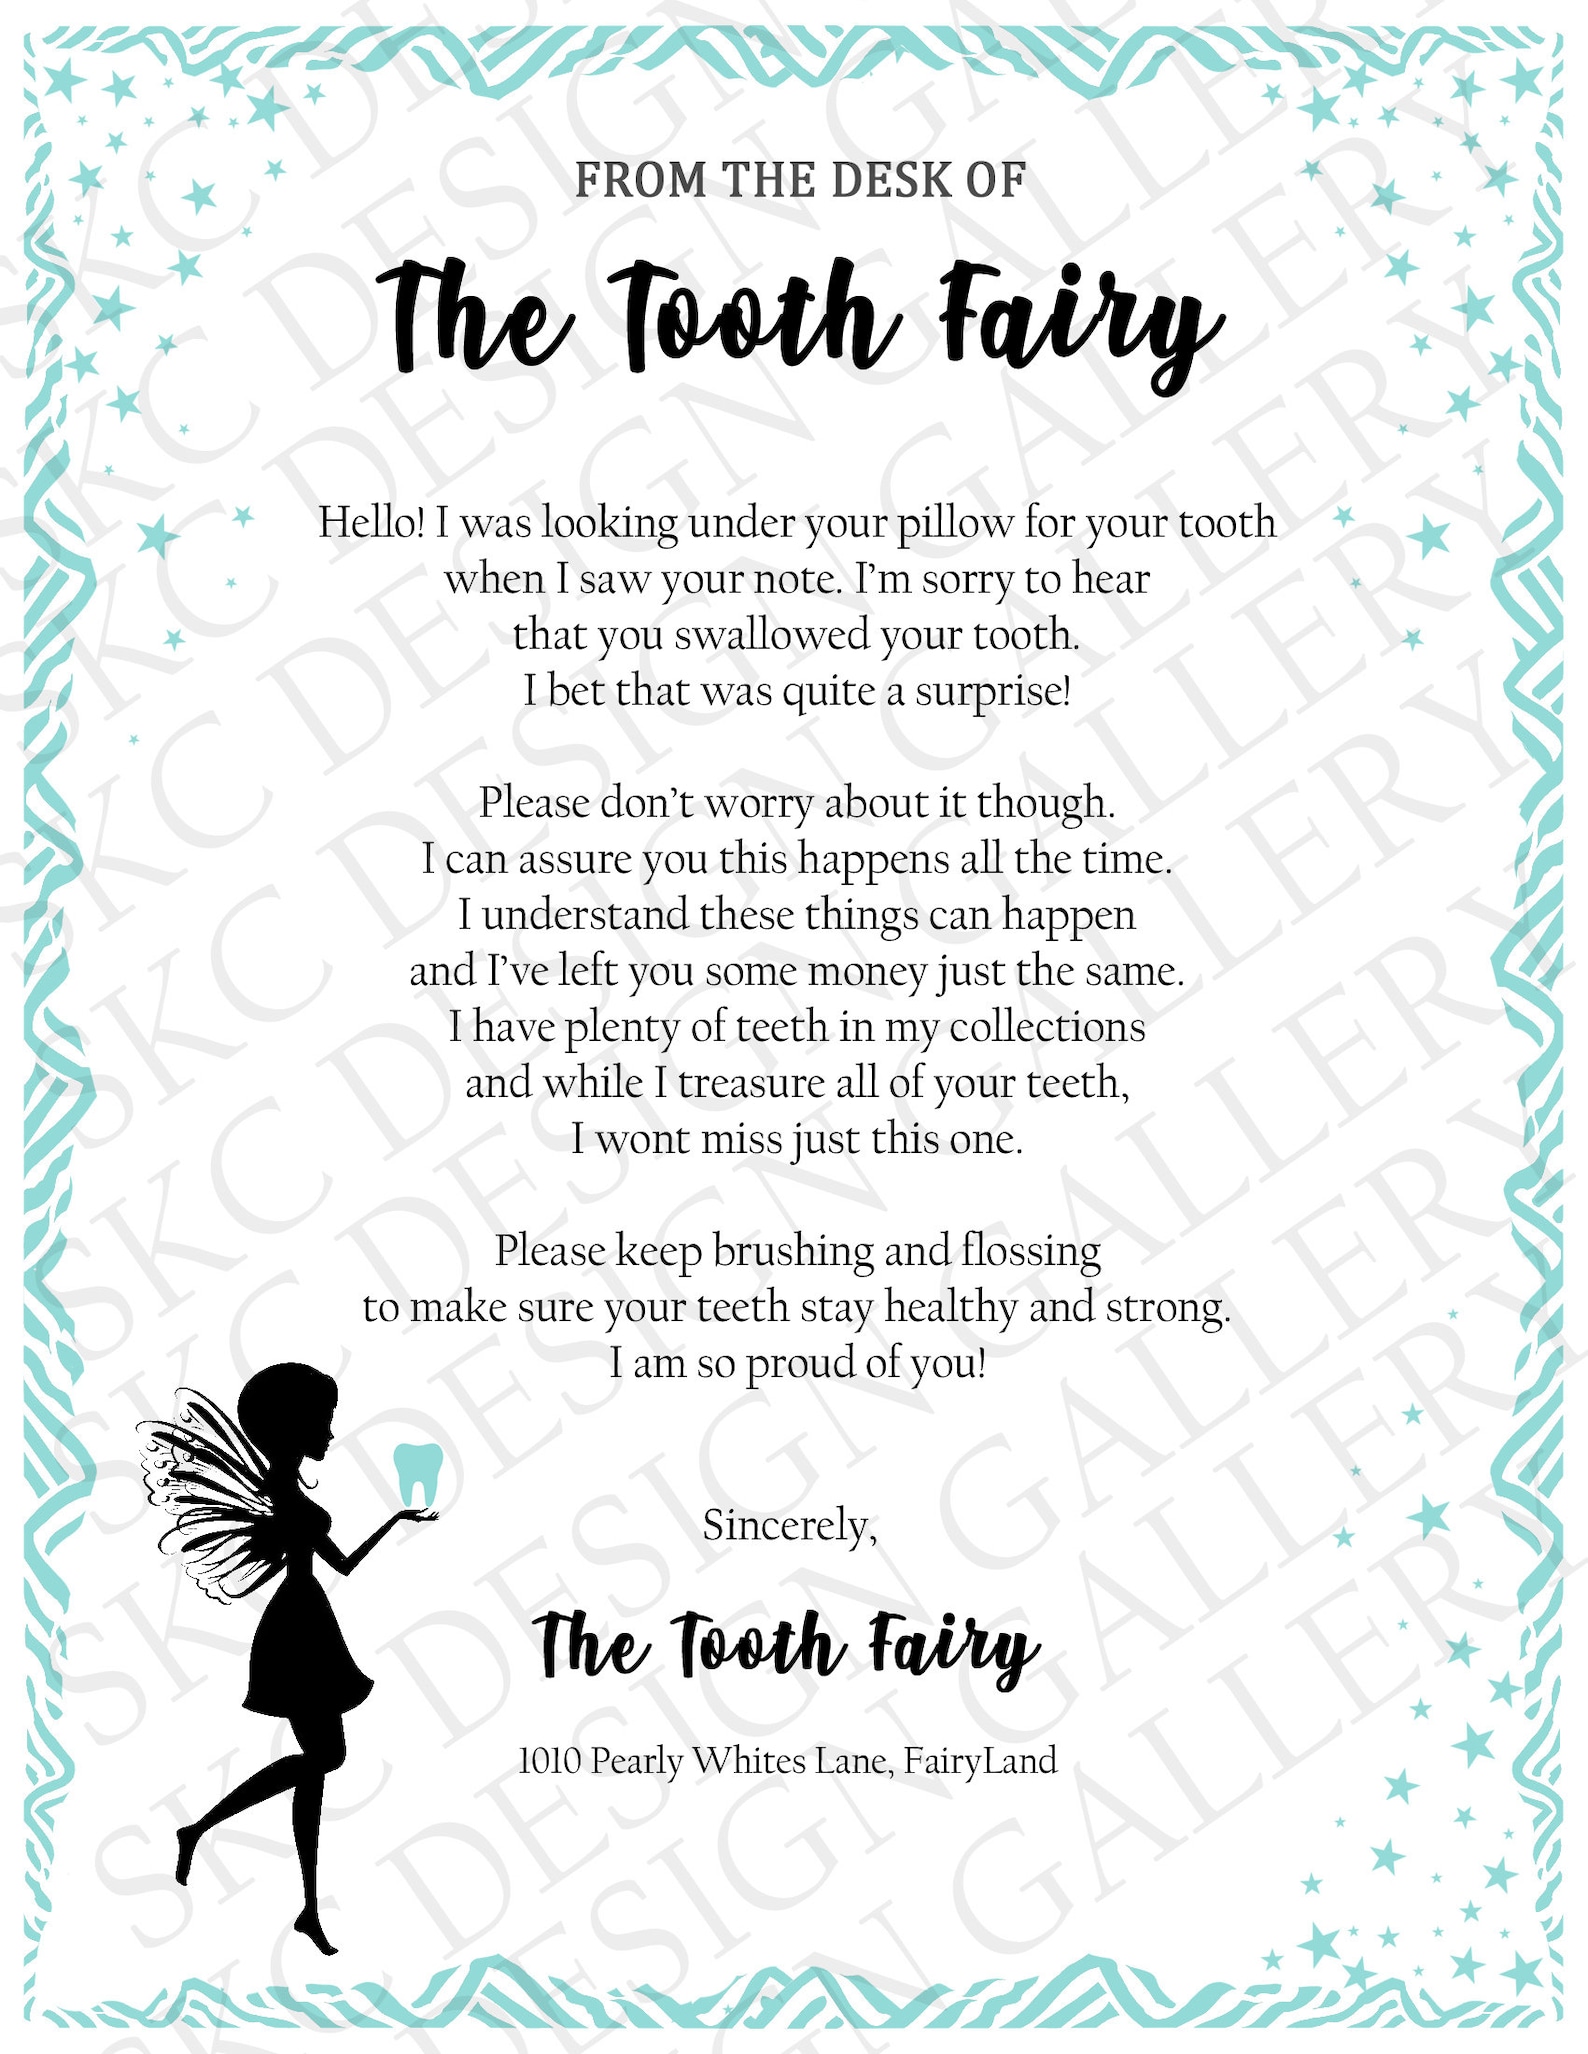 tooth-fairy-letter-child-swallowed-tooth-letter-from-tooth-etsy-canada